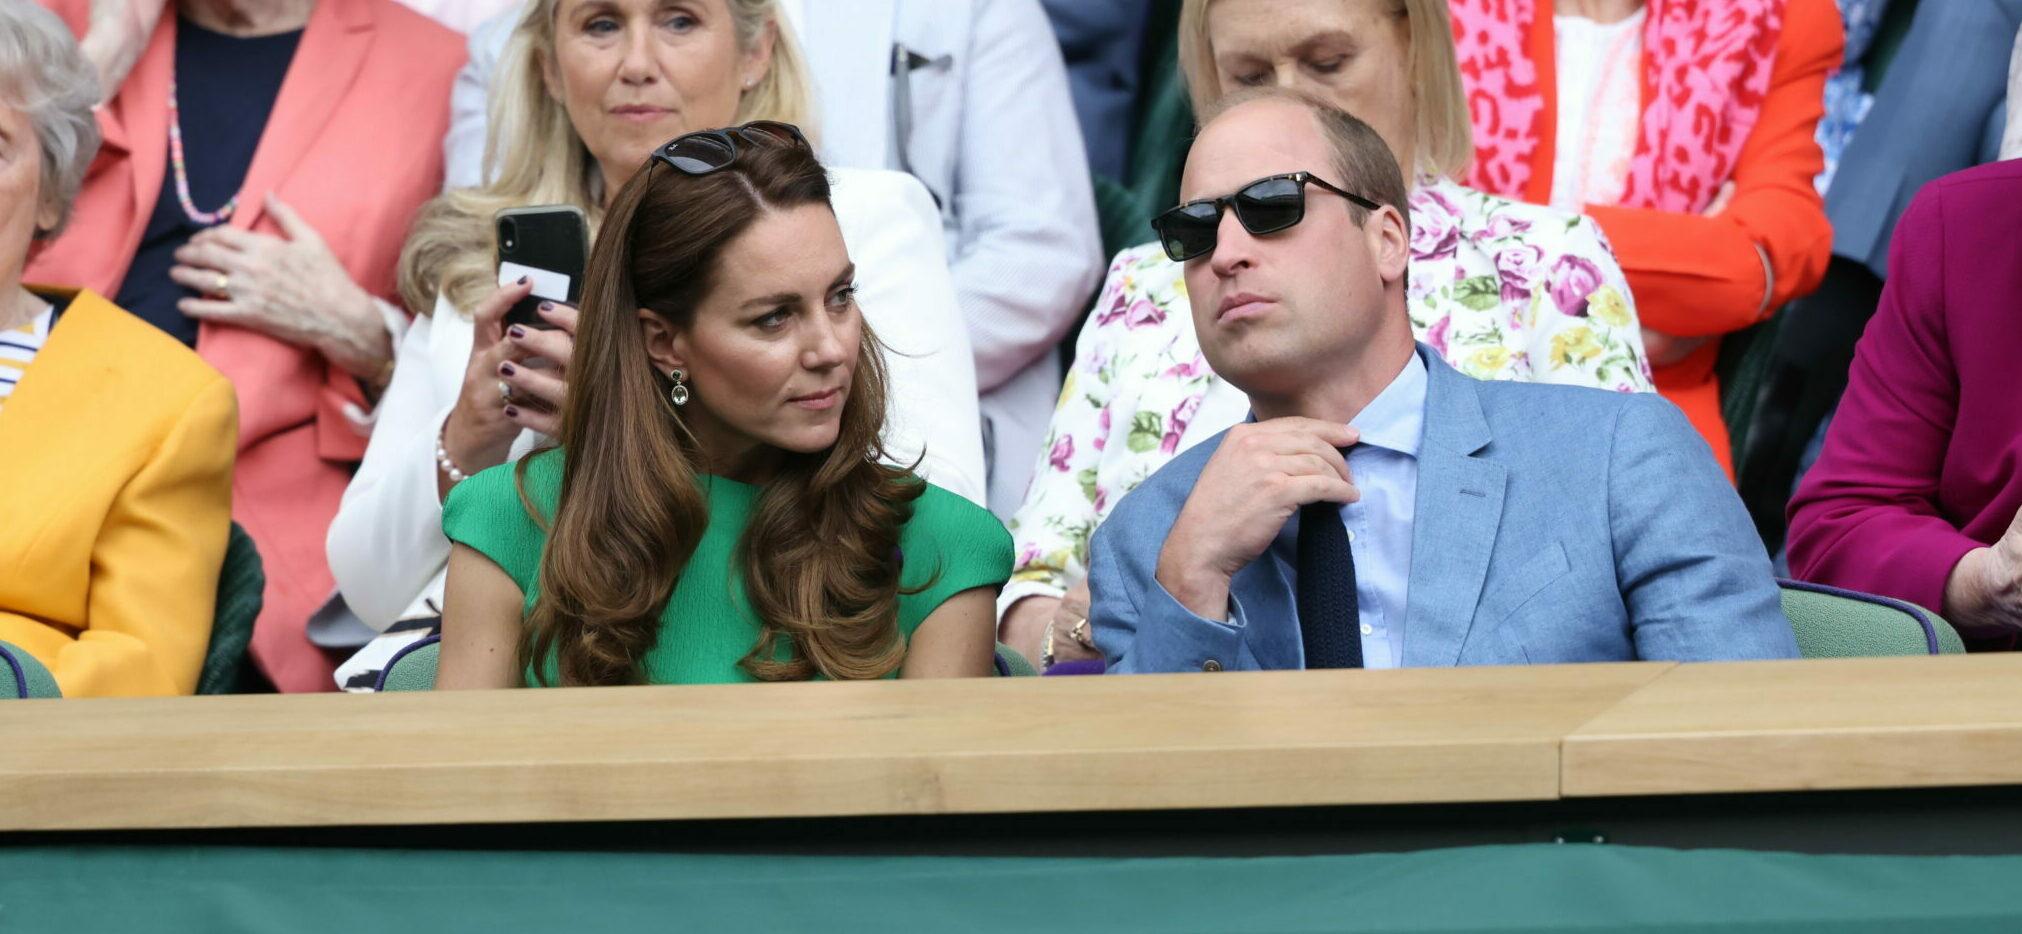 Tom Cruise and Hayley Atwell in the Royal Box on Centre Court at the Wimbledon Tennis Championships Day 12 The All England Lawn Tennis and Croquet Club London England on July 10th 2021